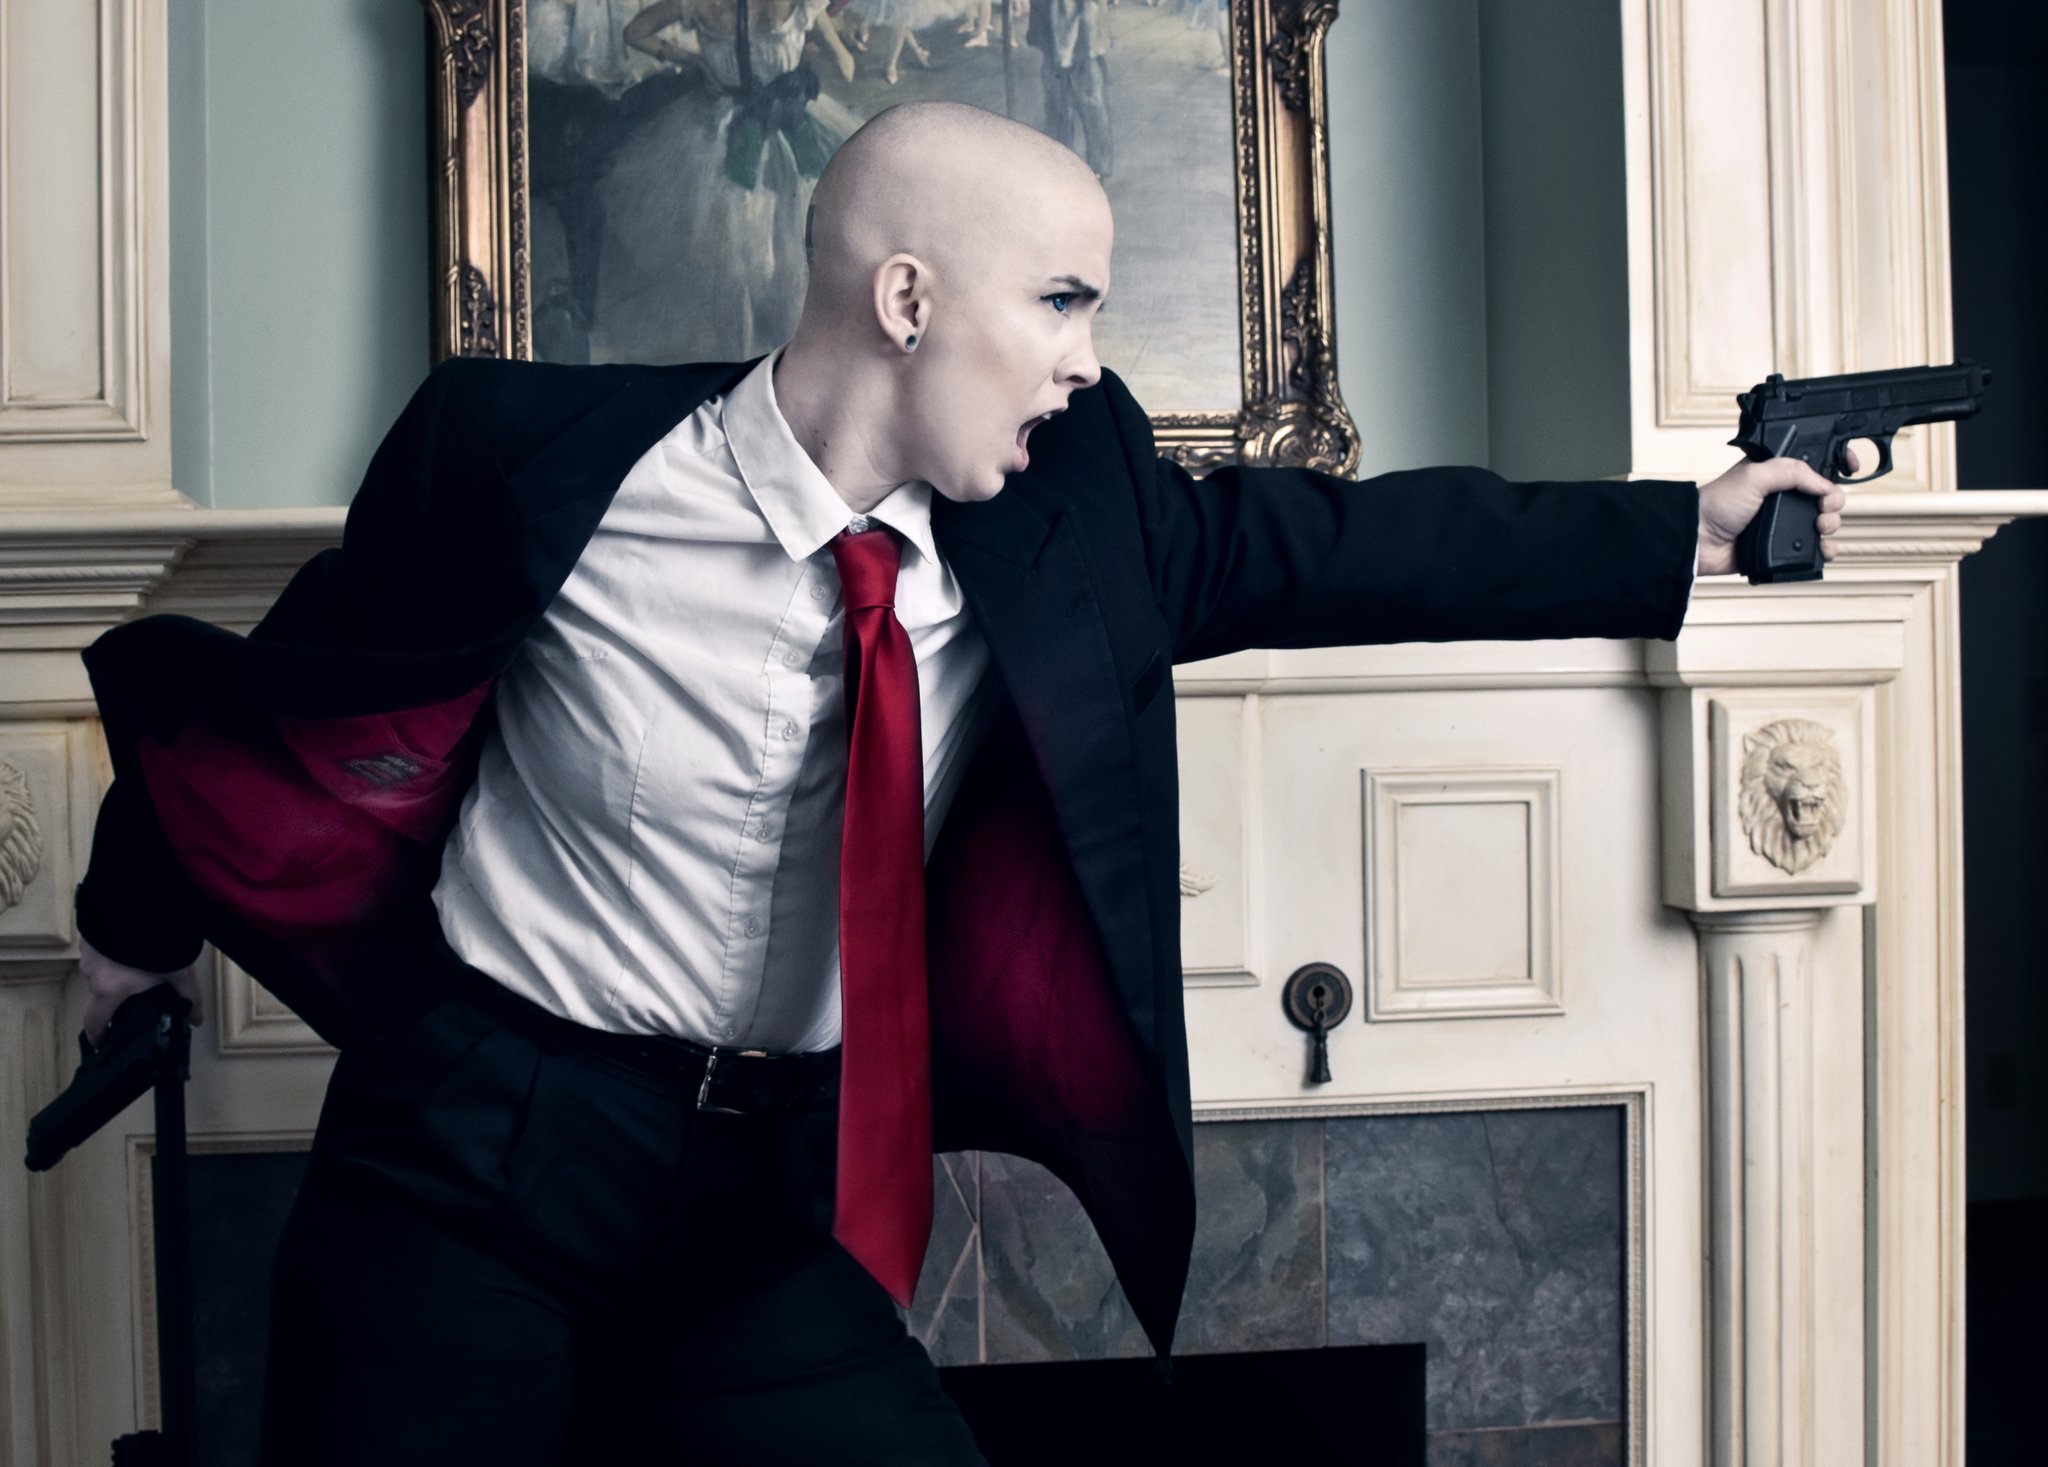 Radical Edward Cropped Preview Of My Hitman Cosplay I Shot This Weekend With Photographer Kananidesigns0 For A Potential Cosplaydeviants Set So Excited To Submit This Bad Boy Agent 47 Ftw